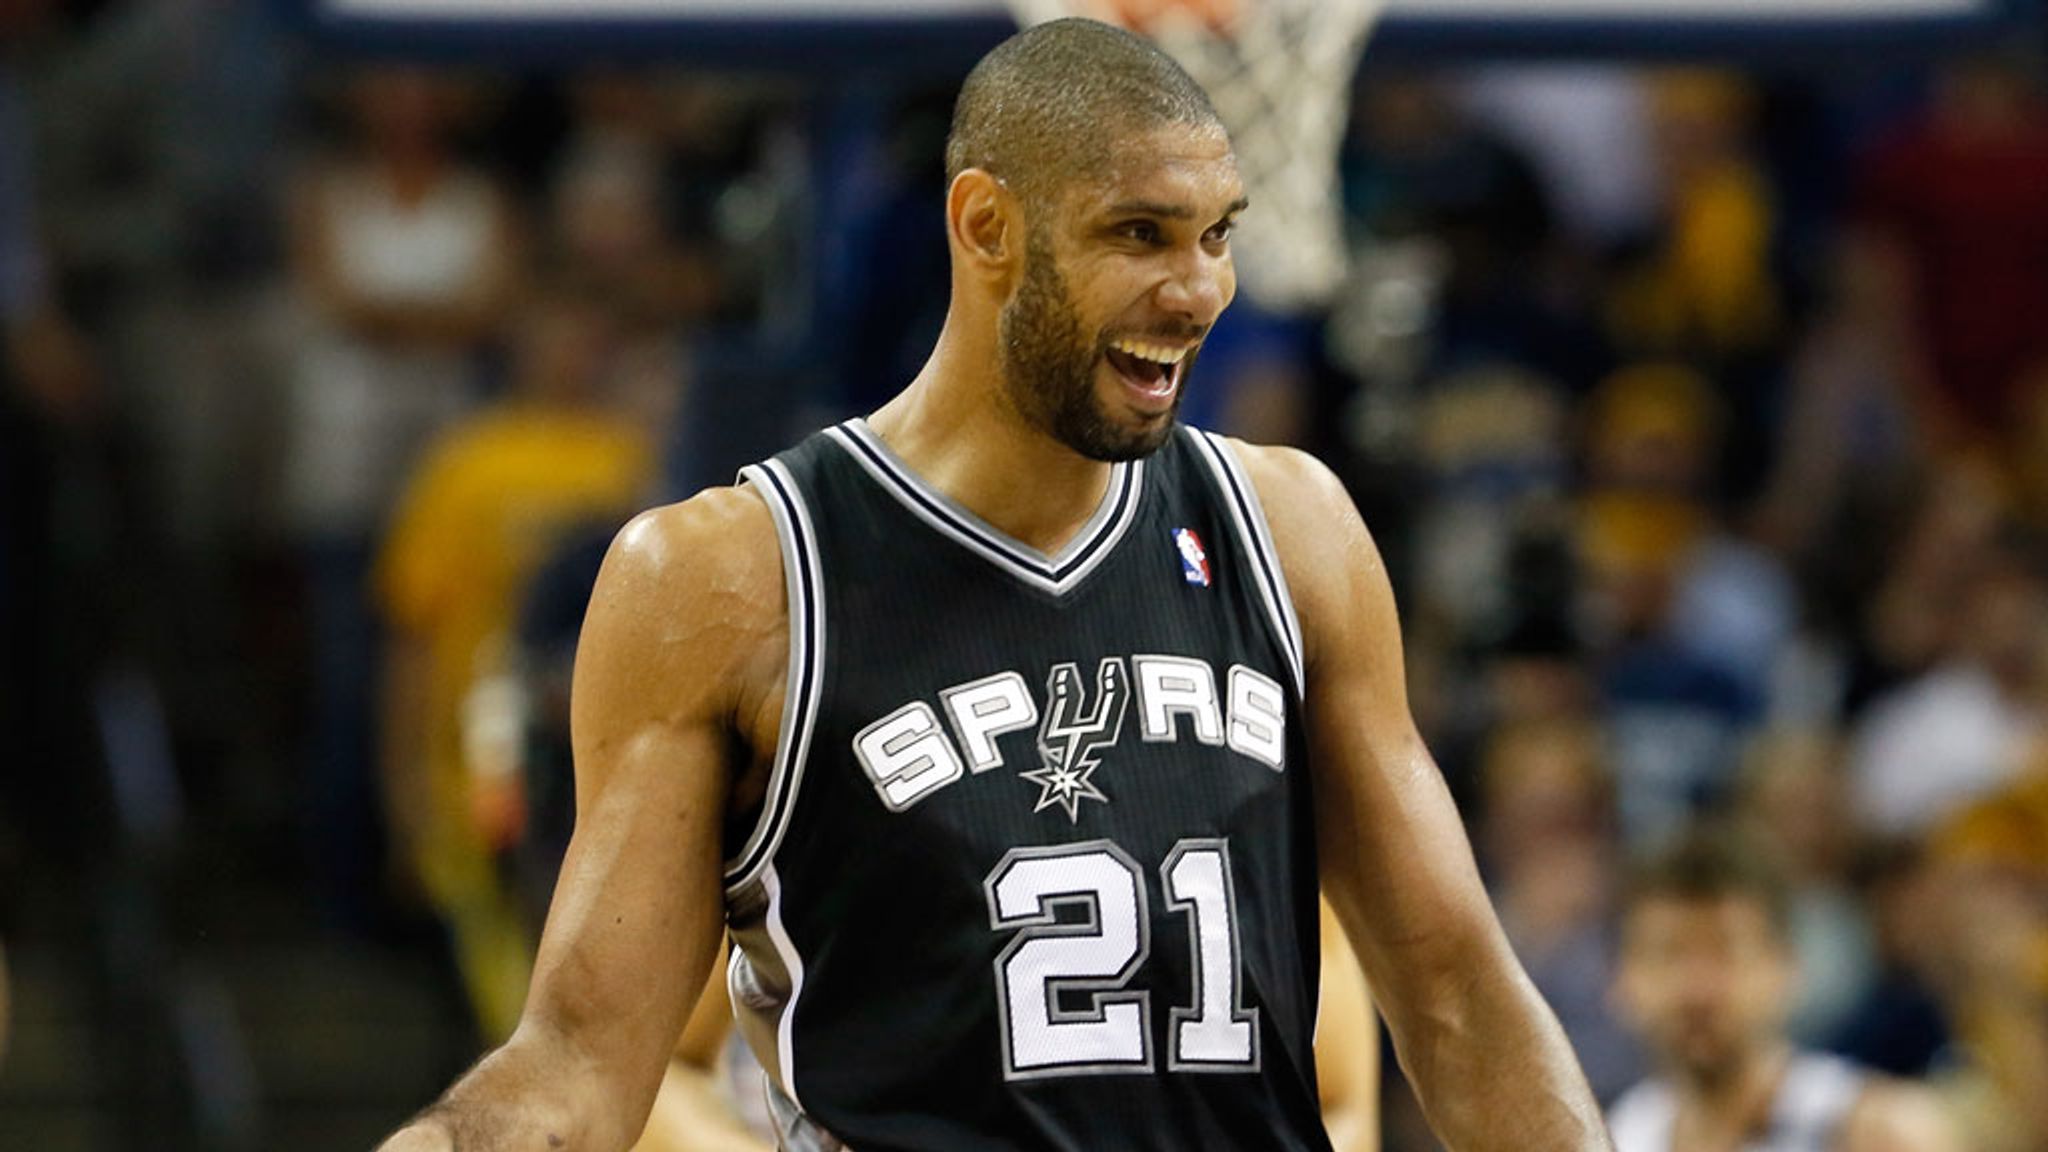 NBA: Tim Duncan led the San Antonio Spurs to another overtime win | Basketball News | Sky Sports